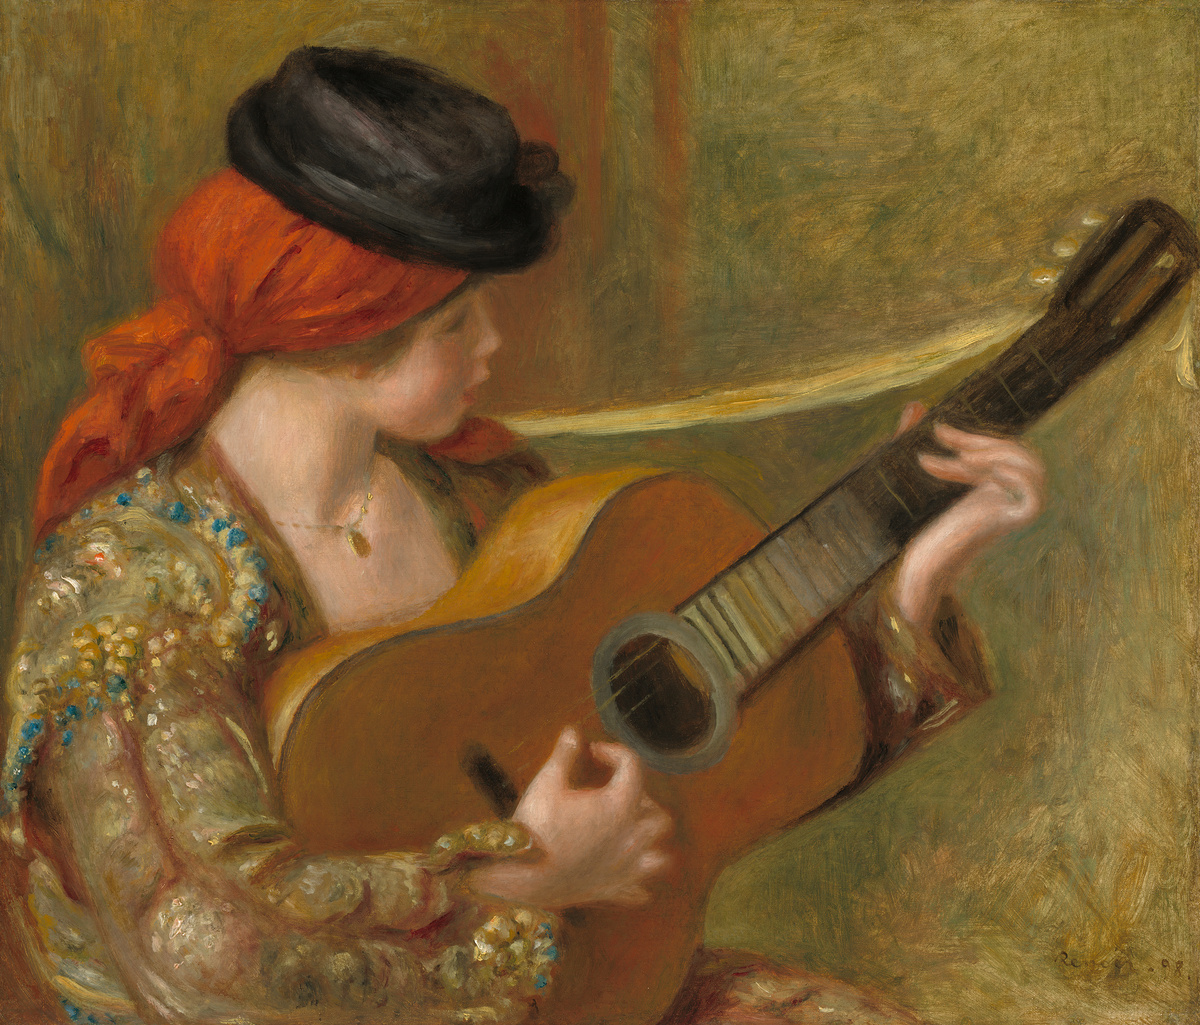 Young Spanish Woman with a Guitar by Auguste Renoir, 1898. Courtesy of National Gallery of Art, Washington.